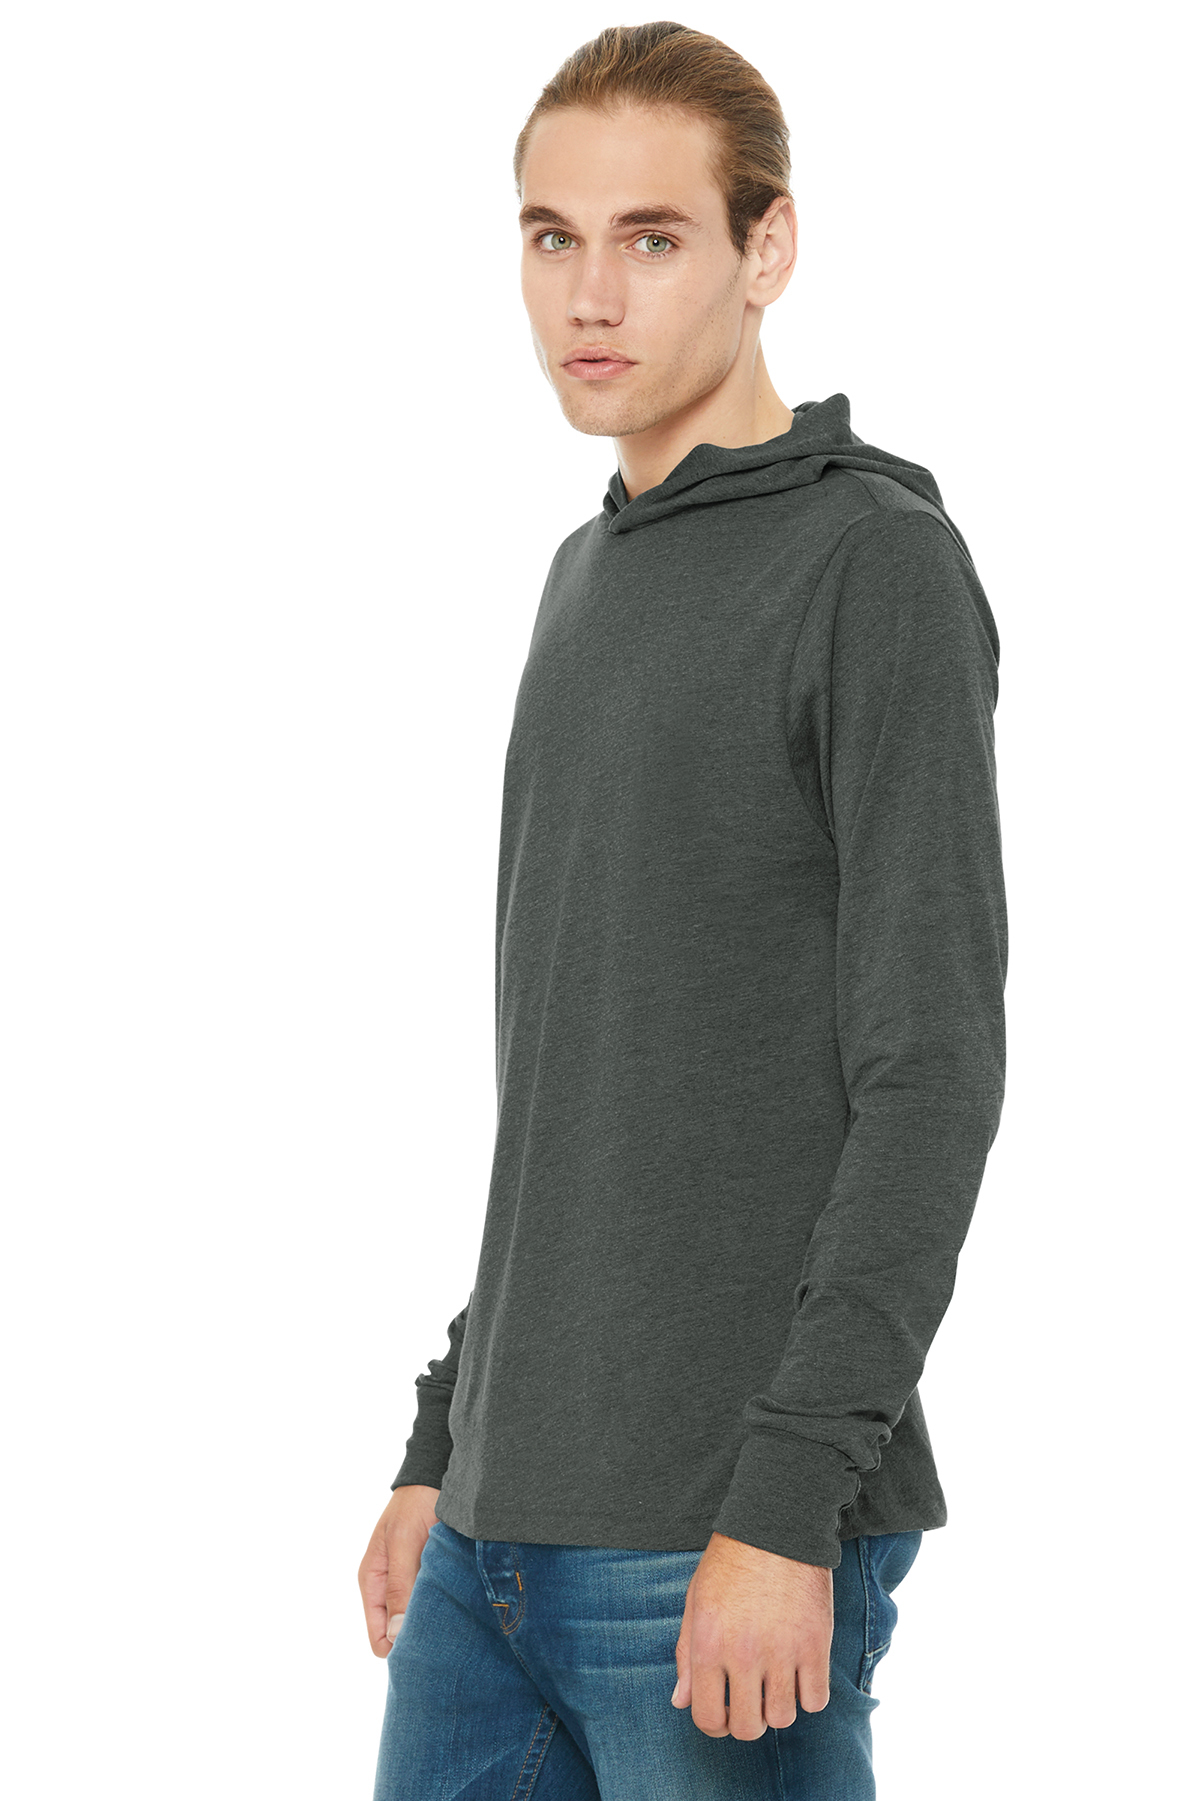 BELLA+CANVAS Unisex Jersey Long Sleeve Hoodie | Product | Company Casuals